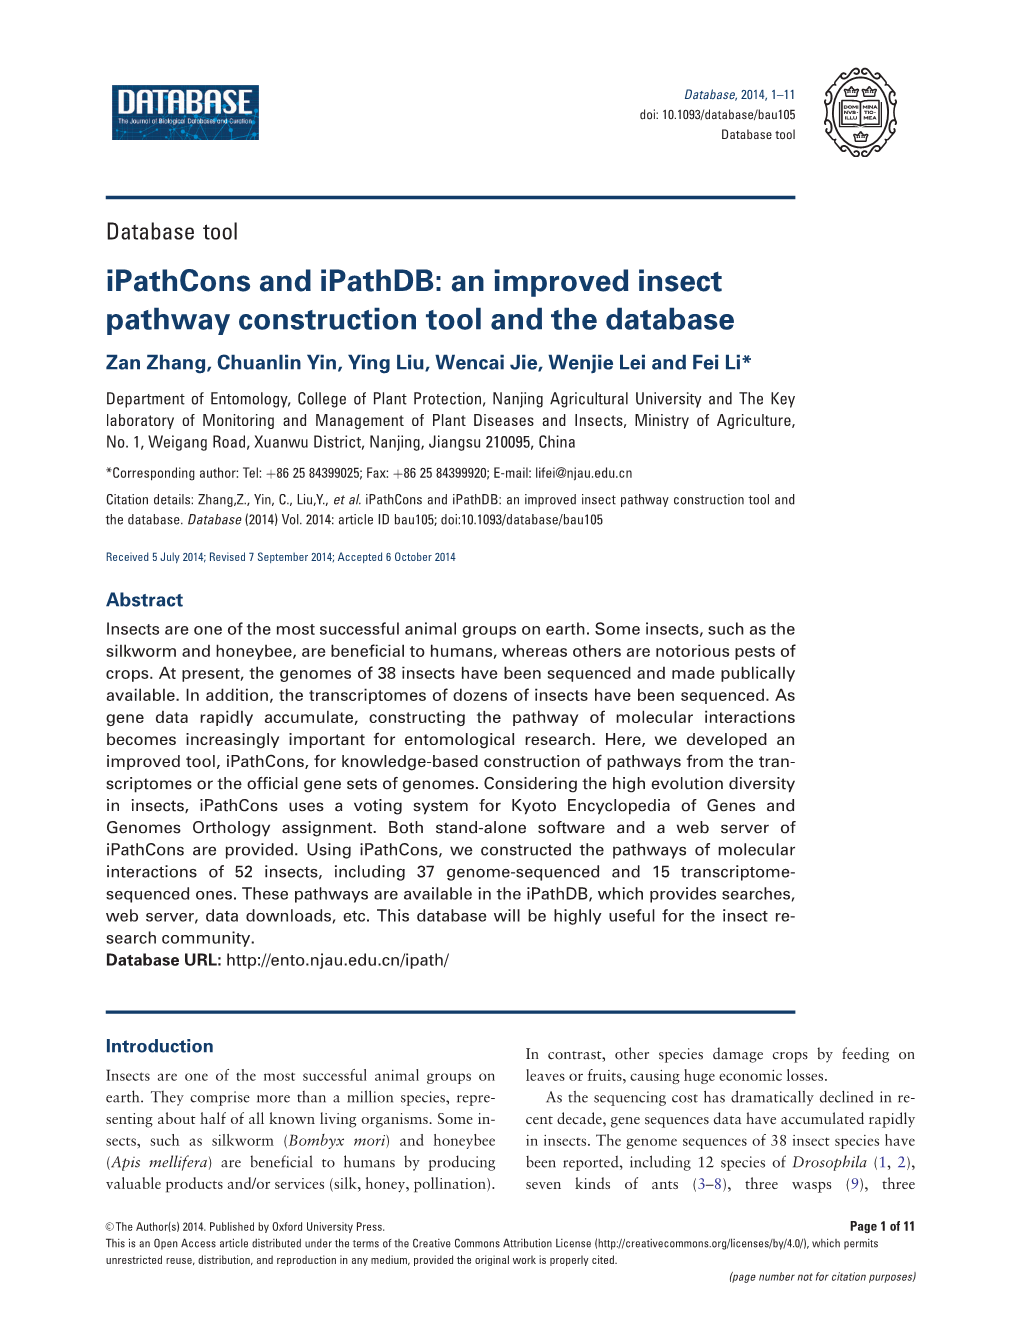 Ipathcons and Ipathdb: an Improved Insect Pathway Construction Tool and the Database Zan Zhang, Chuanlin Yin, Ying Liu, Wencai Jie, Wenjie Lei and Fei Li*